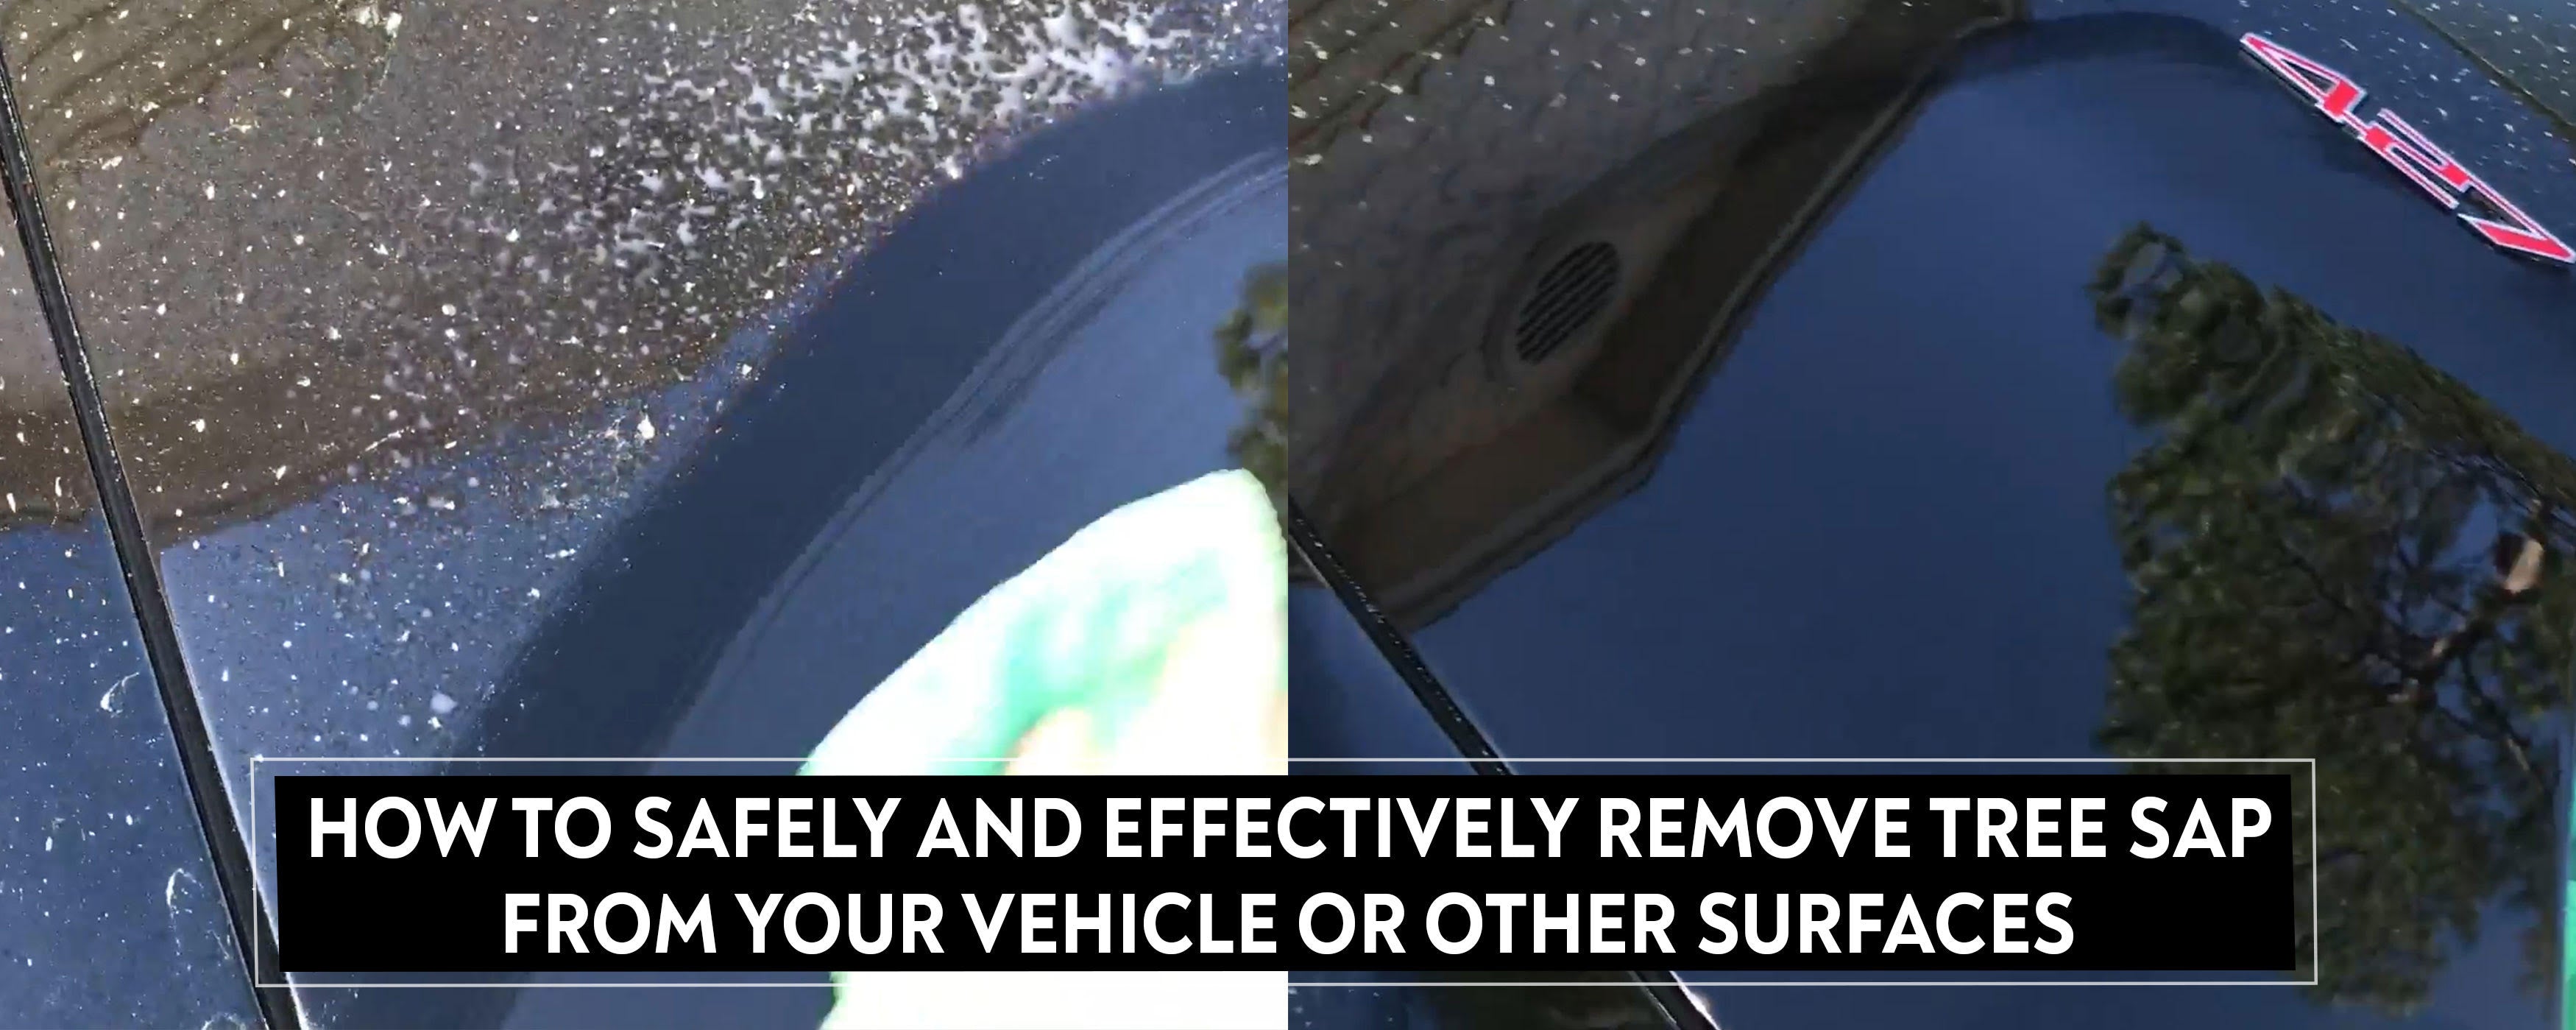 How To Safely and Effectively Remove Tree Sap from Your Car/Vehicle or Other Surfaces